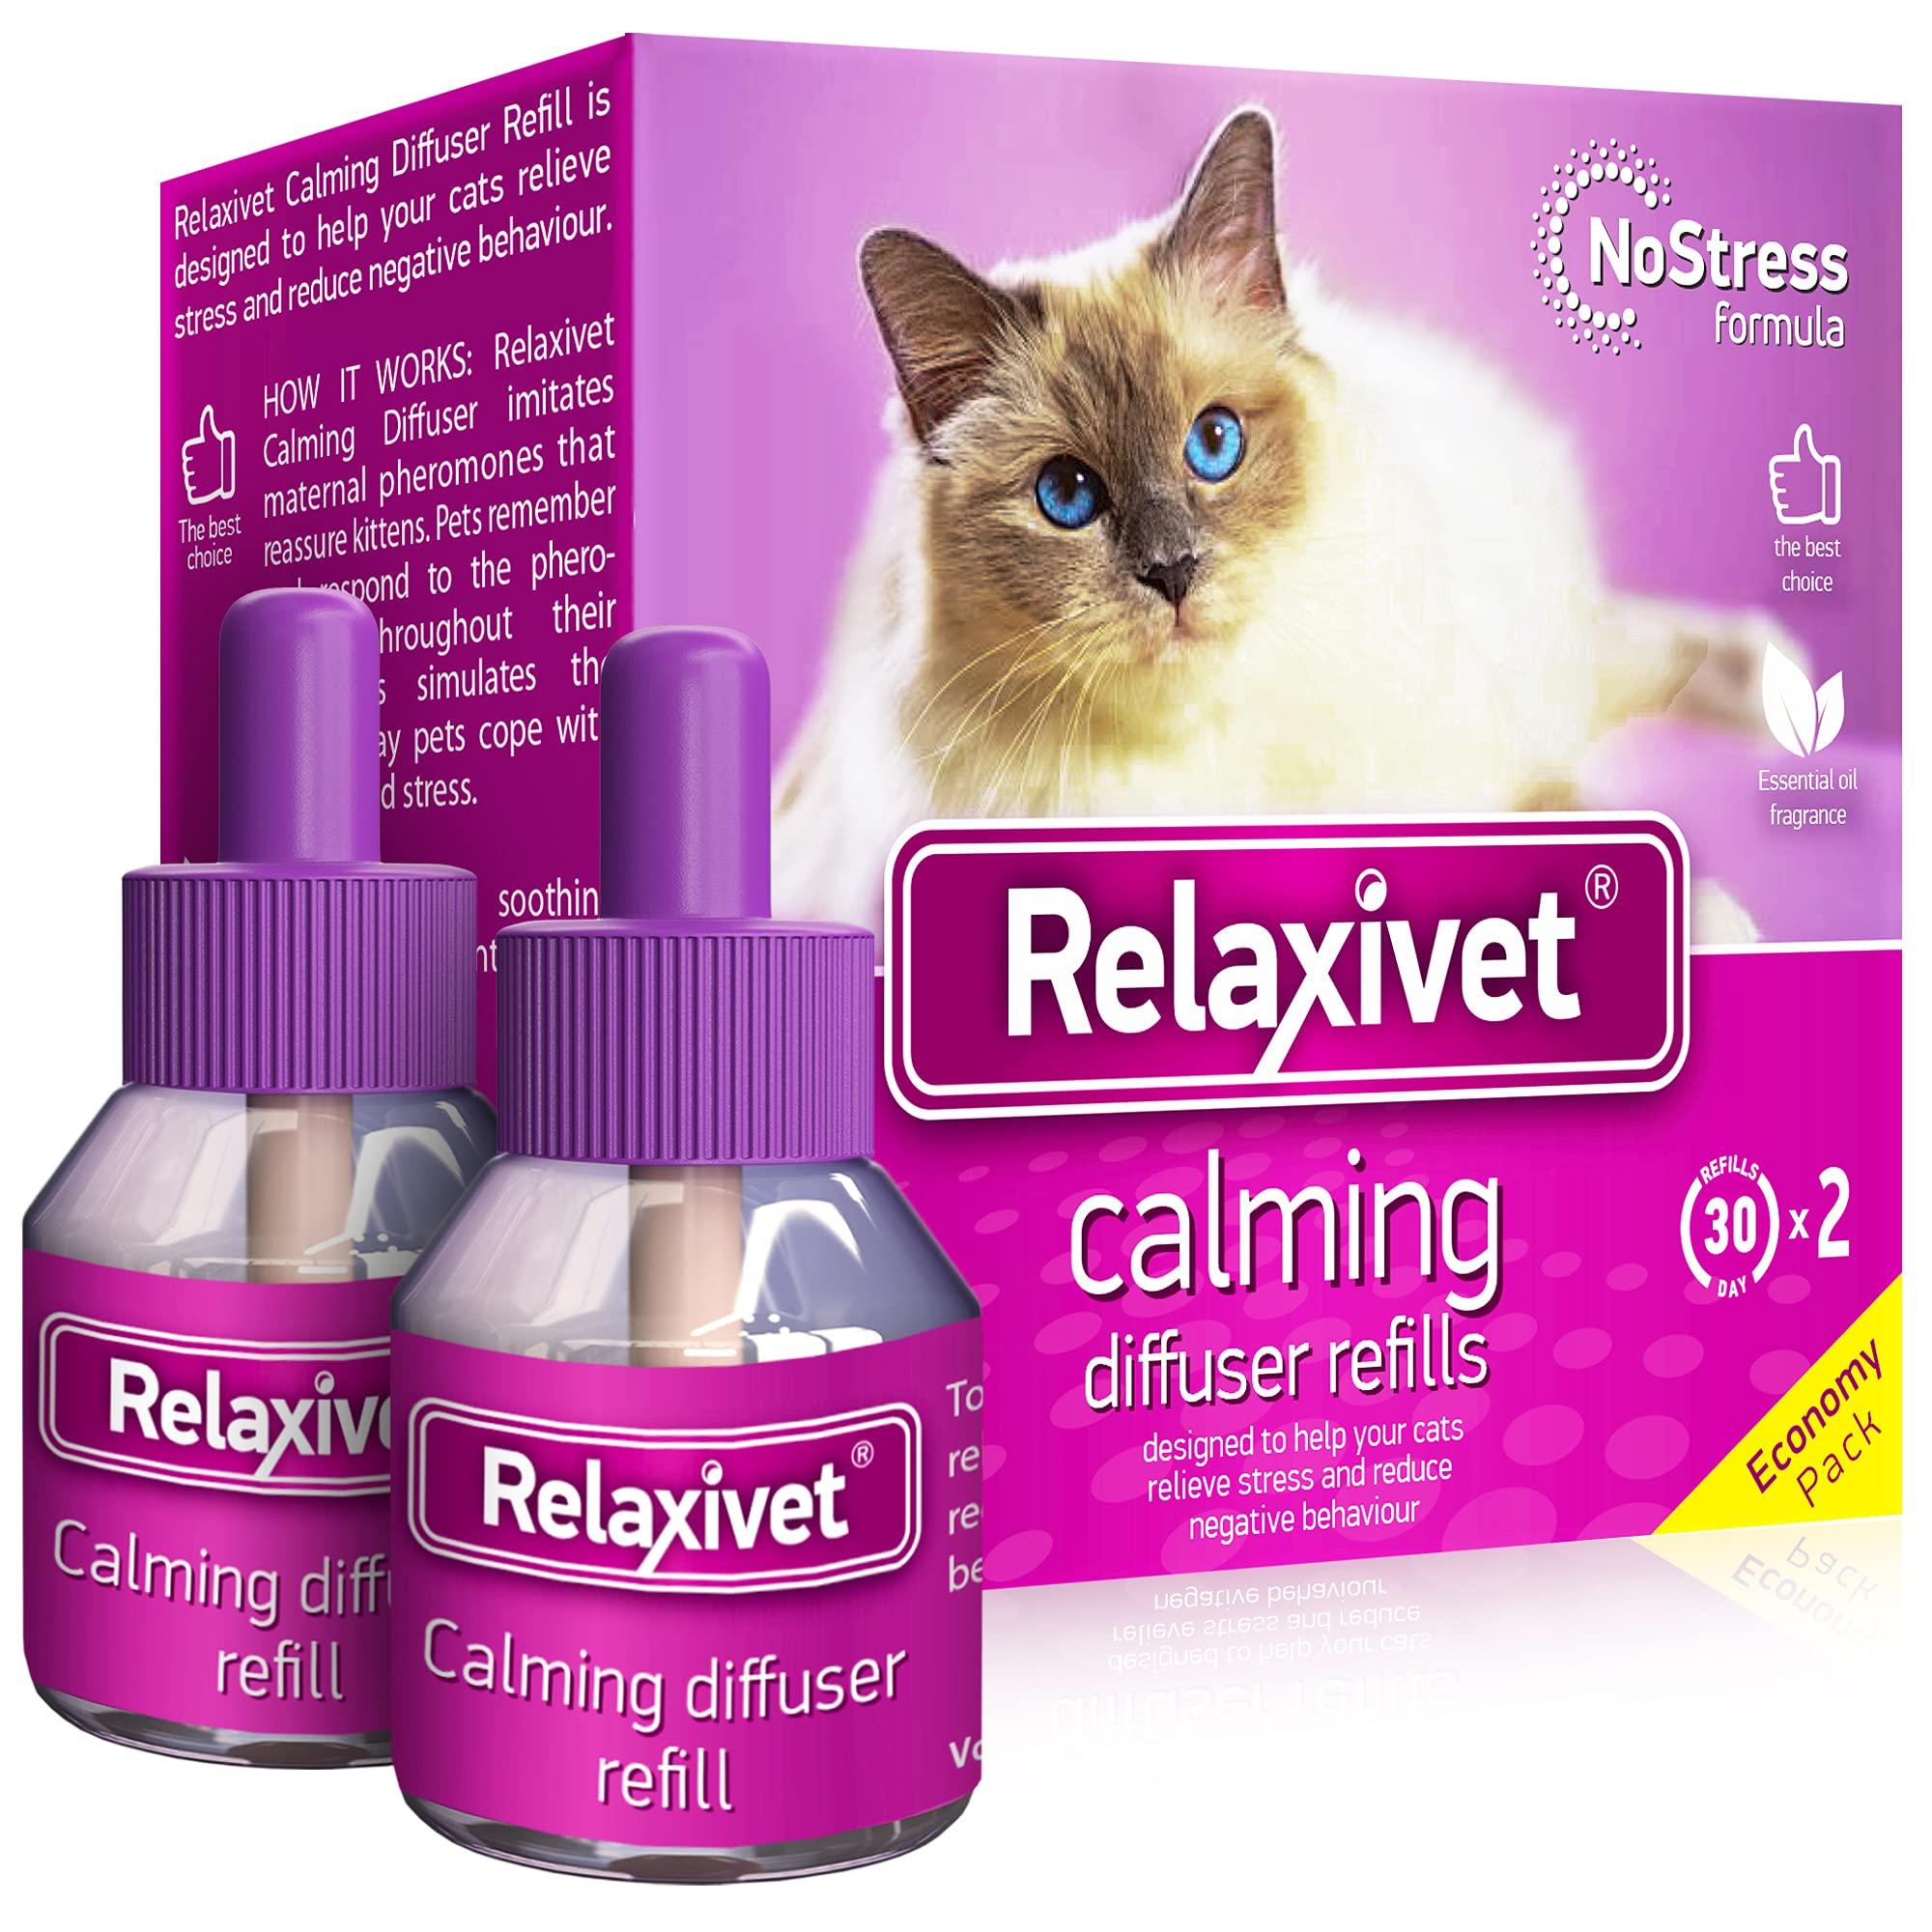 Relaxivet cat calming Diffuser Refill Pet Anti Anxiety Products - Feline calm Pheromones cats Stress Relief comfort Help with Pee, New Zone, Aggression, Fighting with Dogs Other Behavior